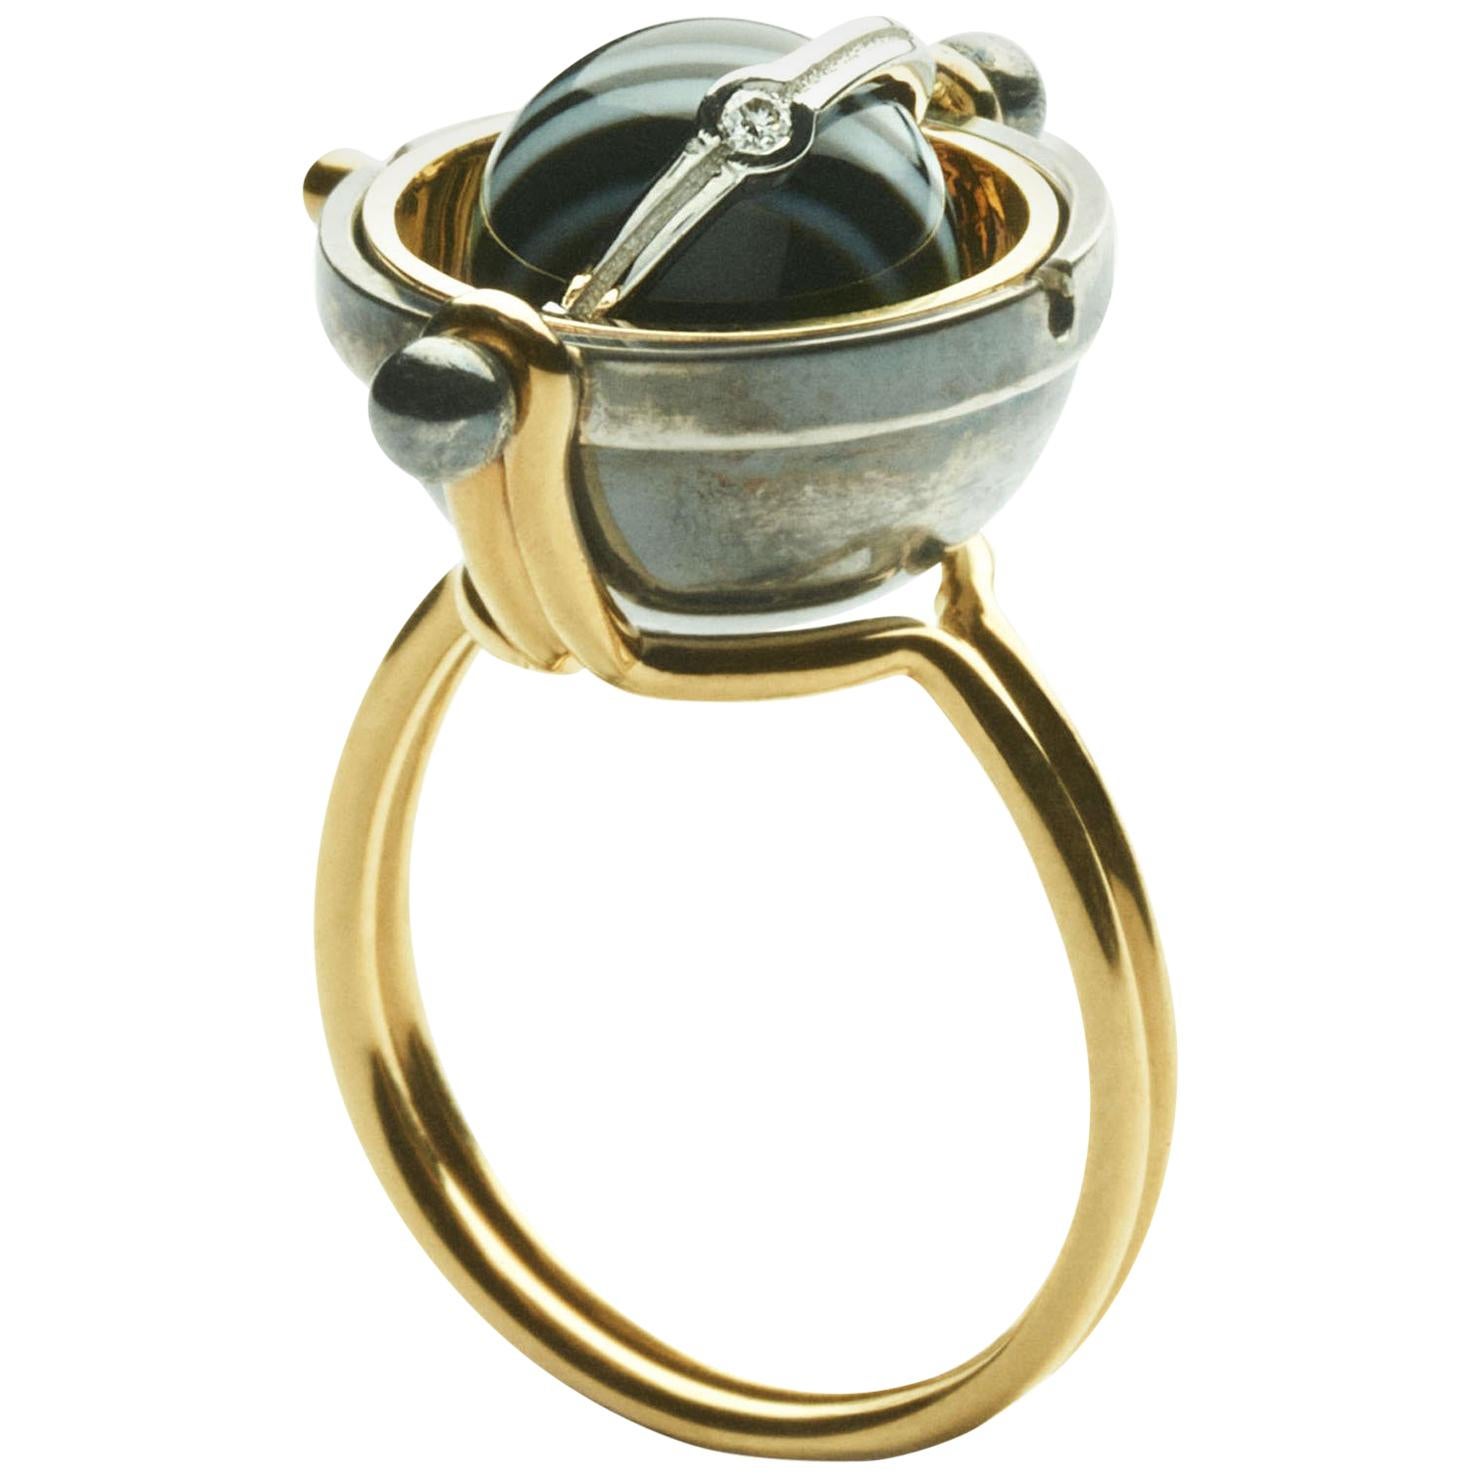 Onyx Diamonds Sphere Ring in 18k yellow gold by Elie Top